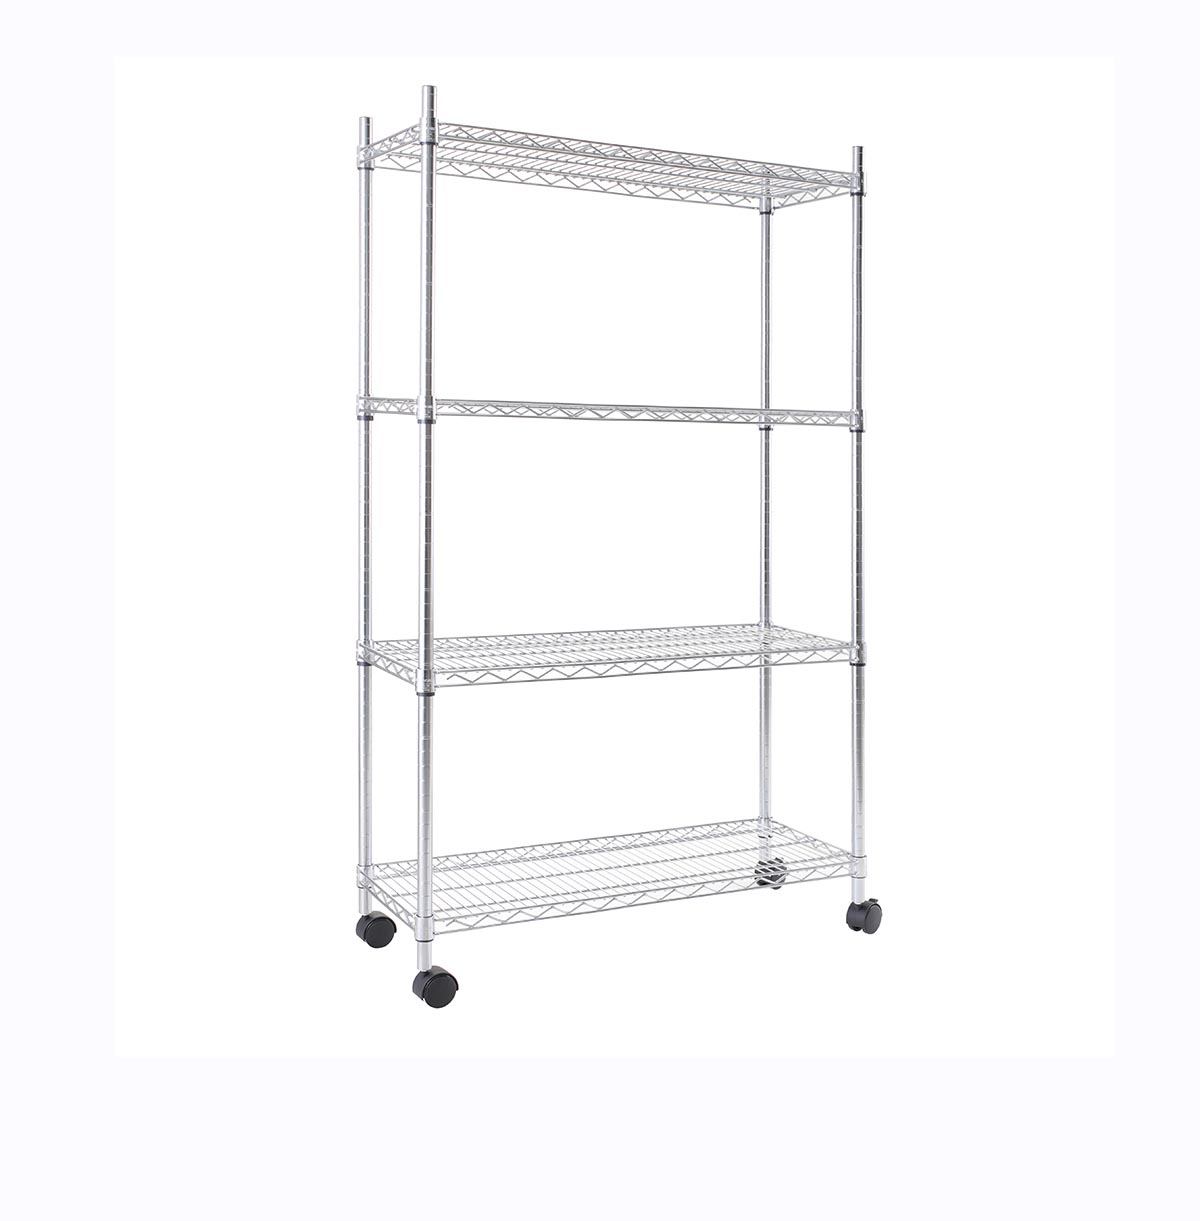 What types of heavy-duty shelves are available for selection